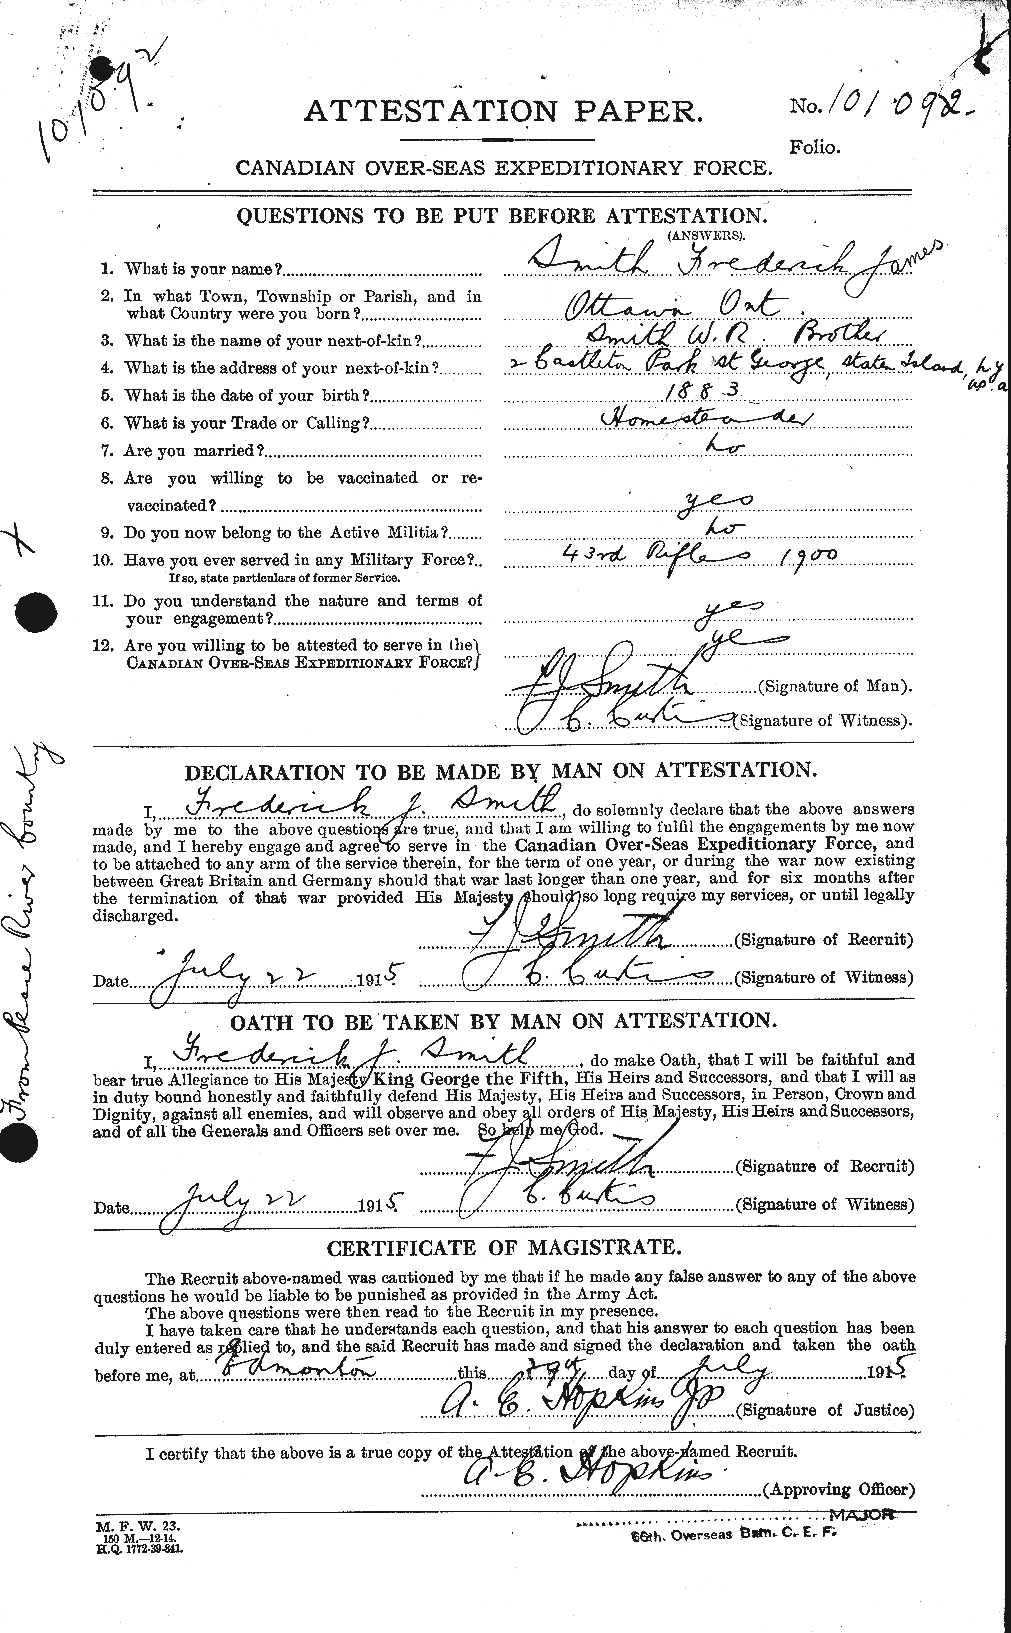 Personnel Records of the First World War - CEF 103687a